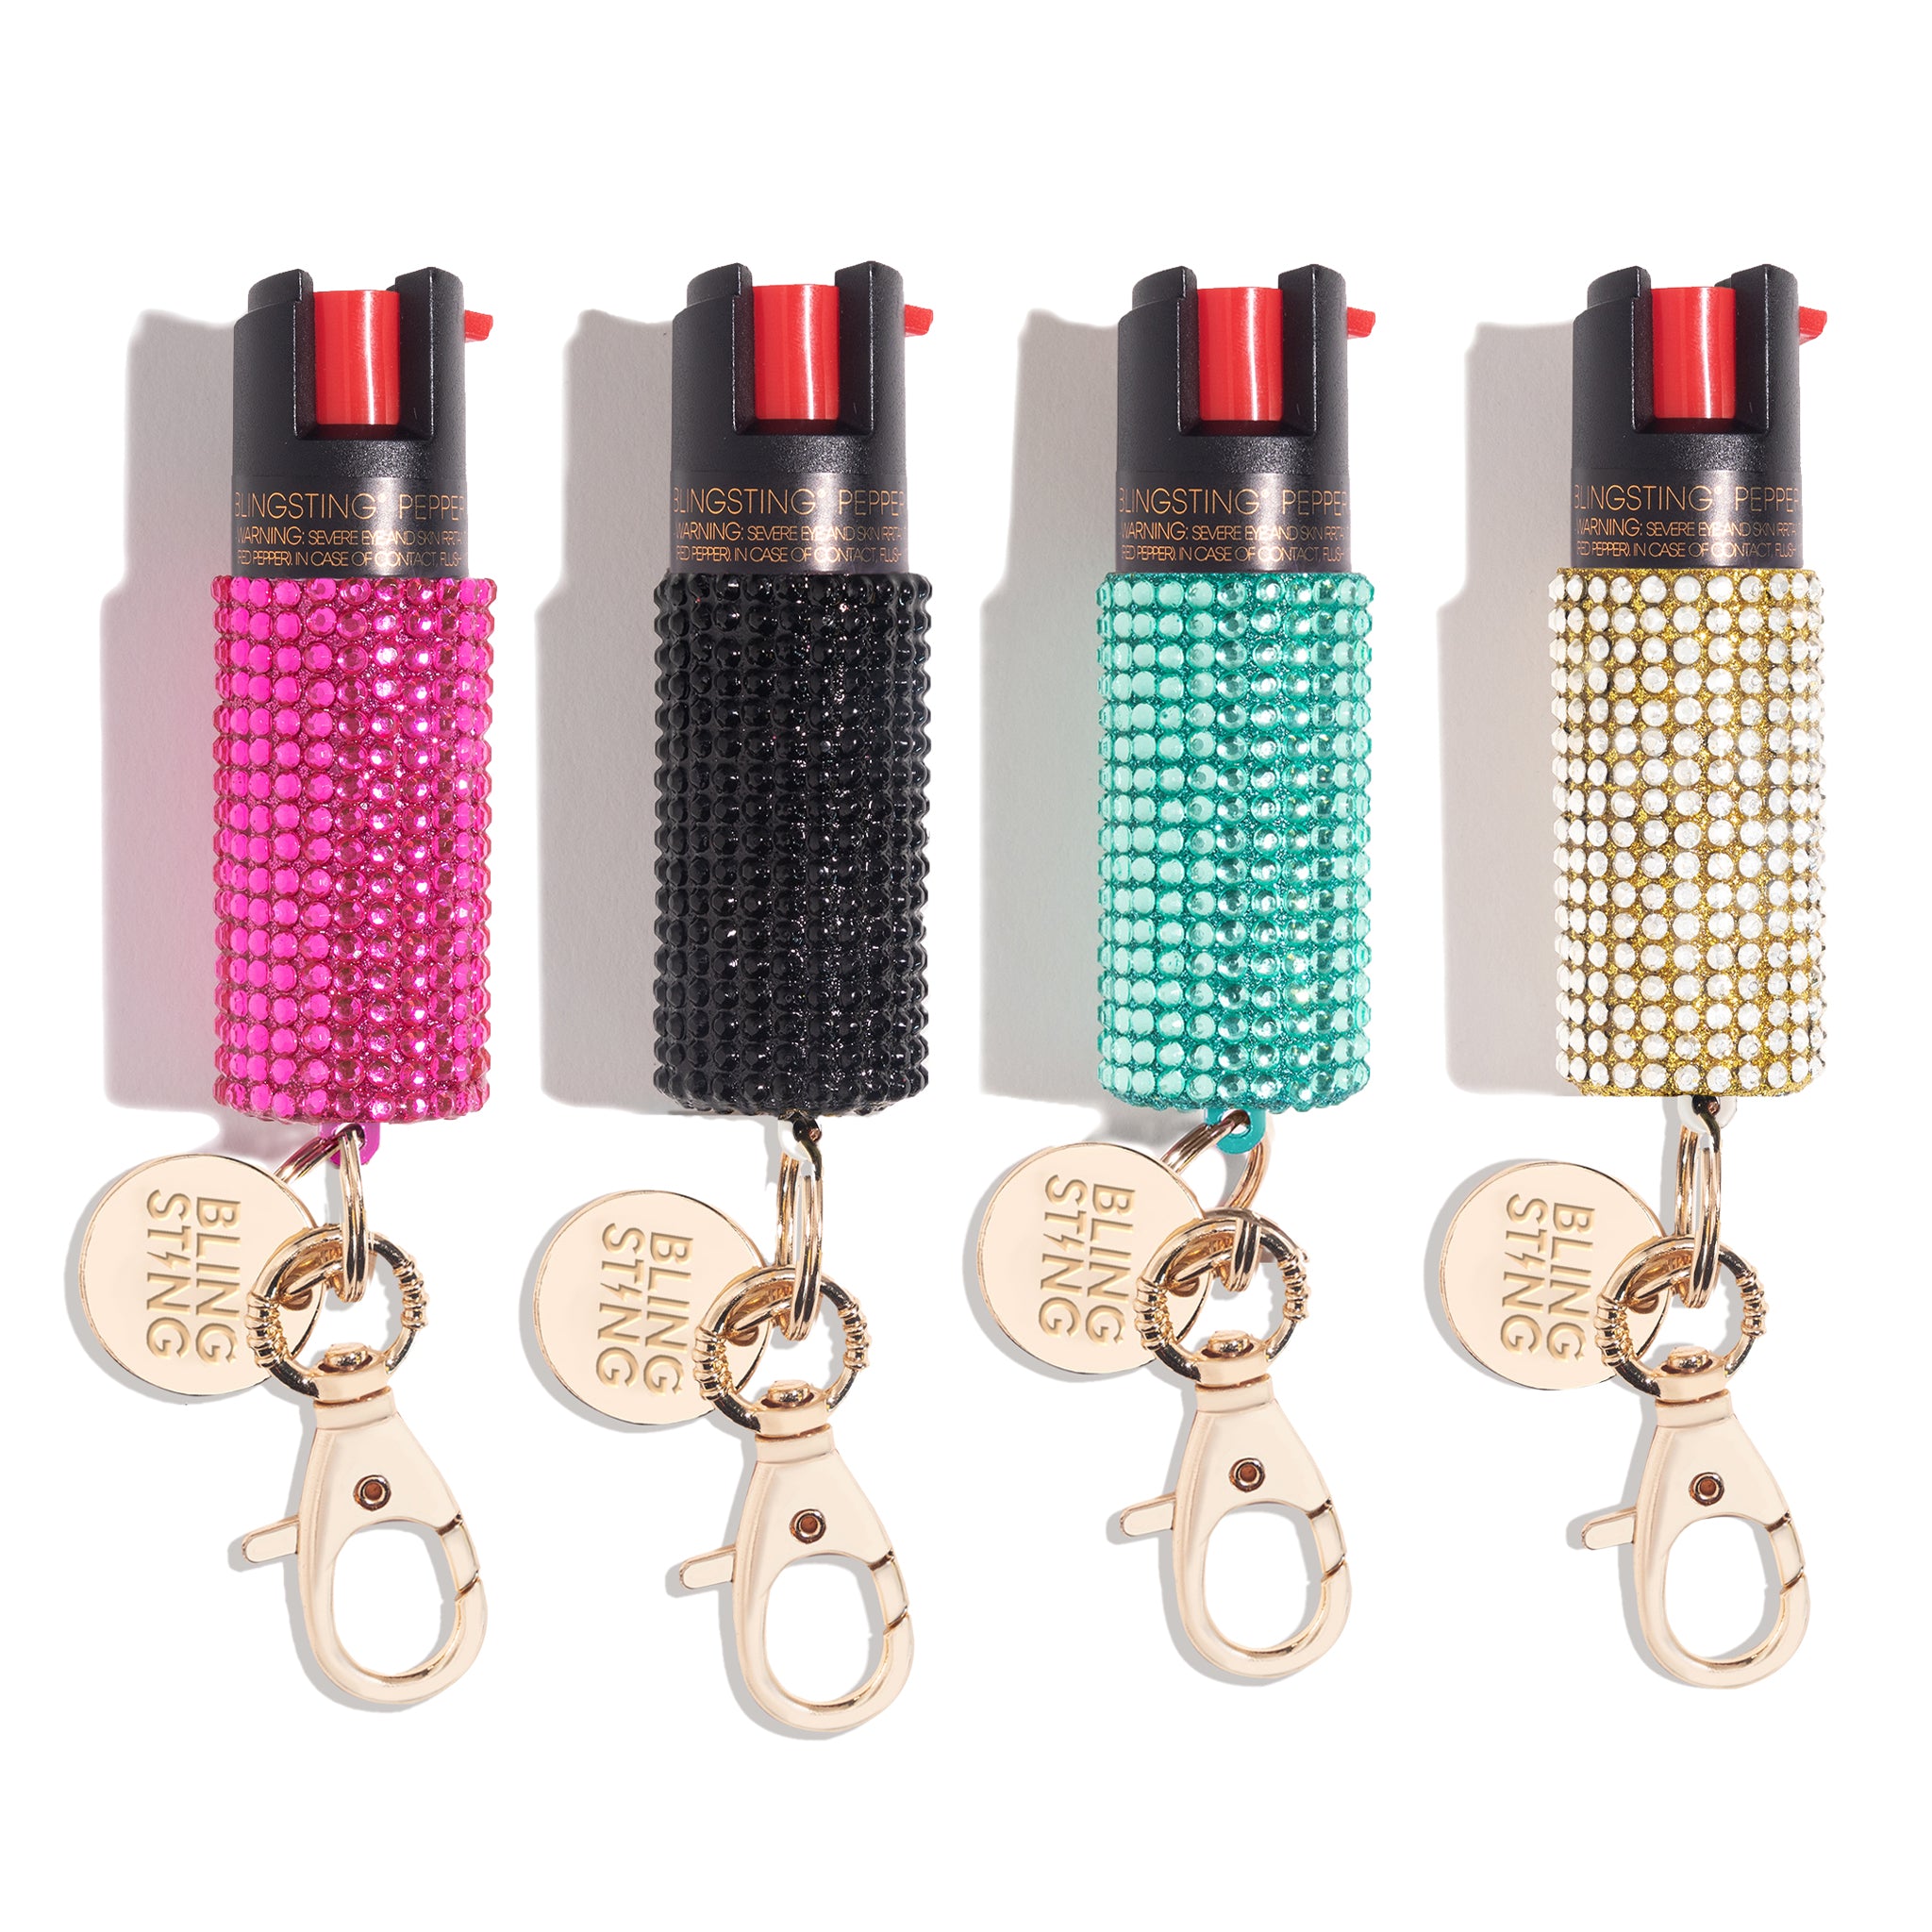 The Artemis Company - If your bulky, plastic, pink cans of pepper spray  just aren't cutting it for you anymore, check out this interesting surprise  from our Tassel Spike Necklace and discover